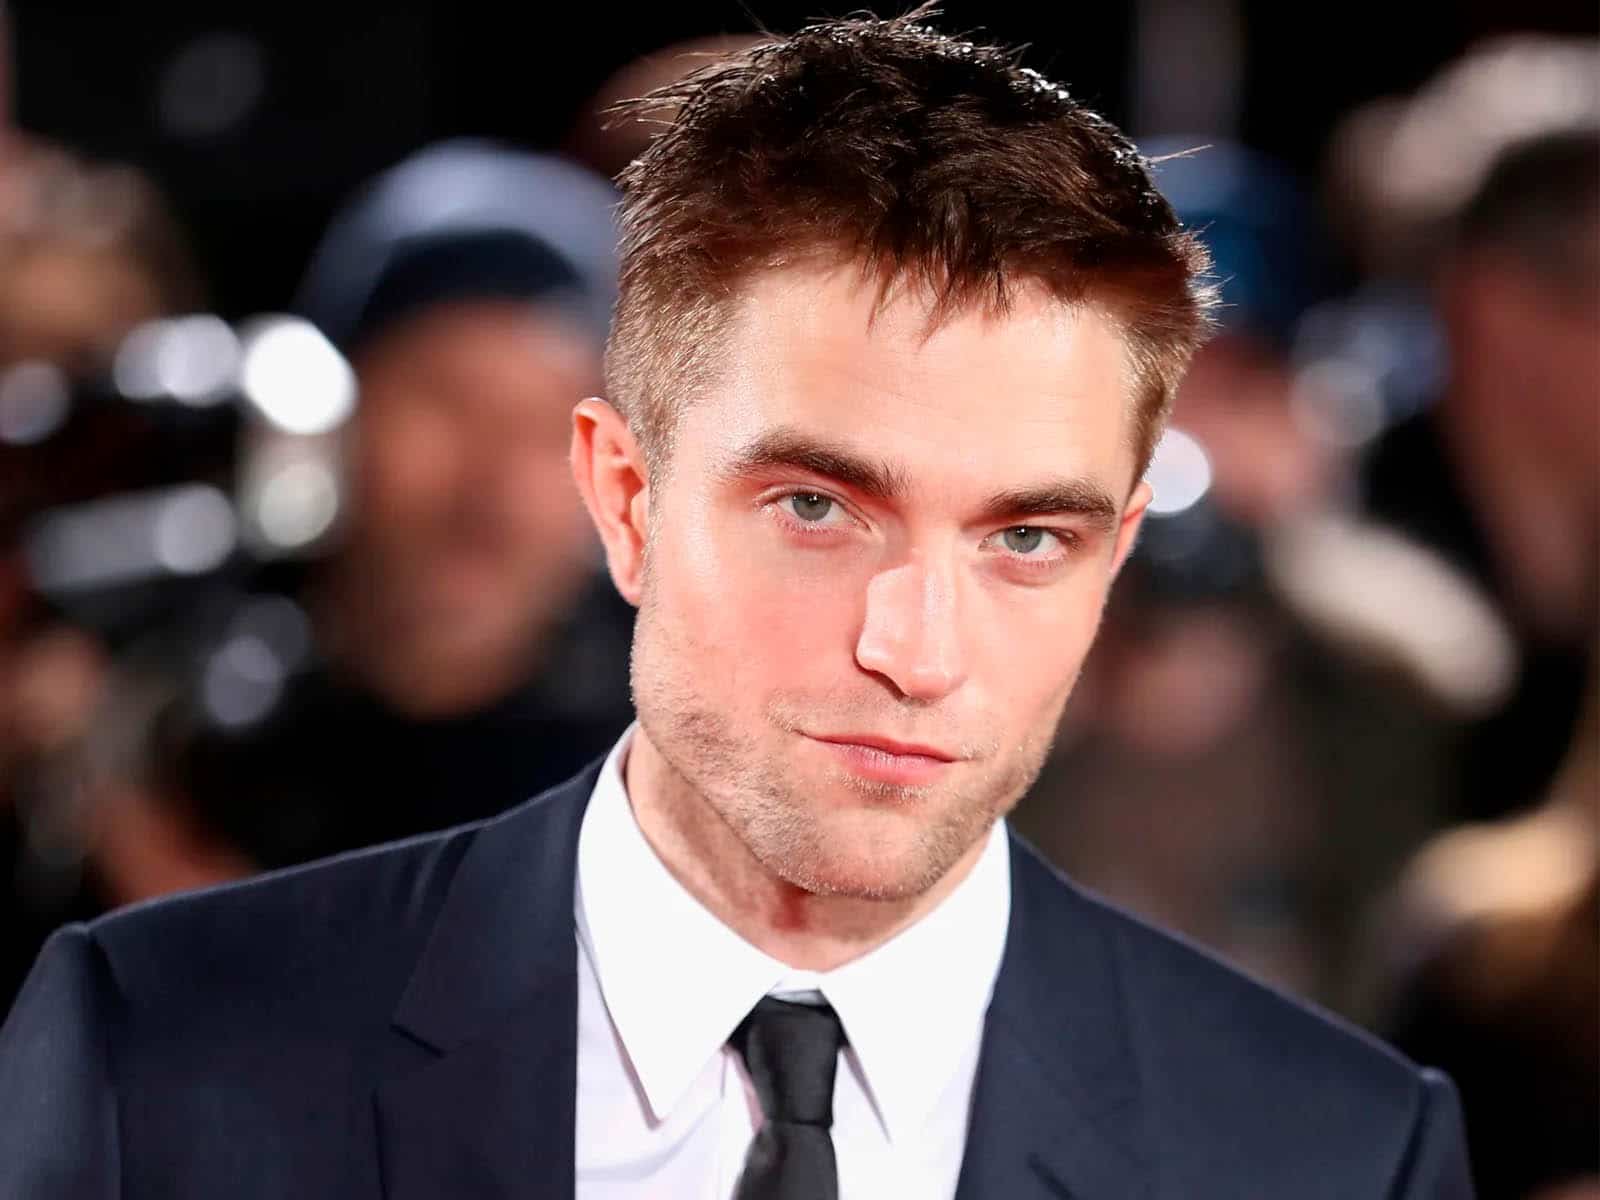 Robert Pattinson may have released a song